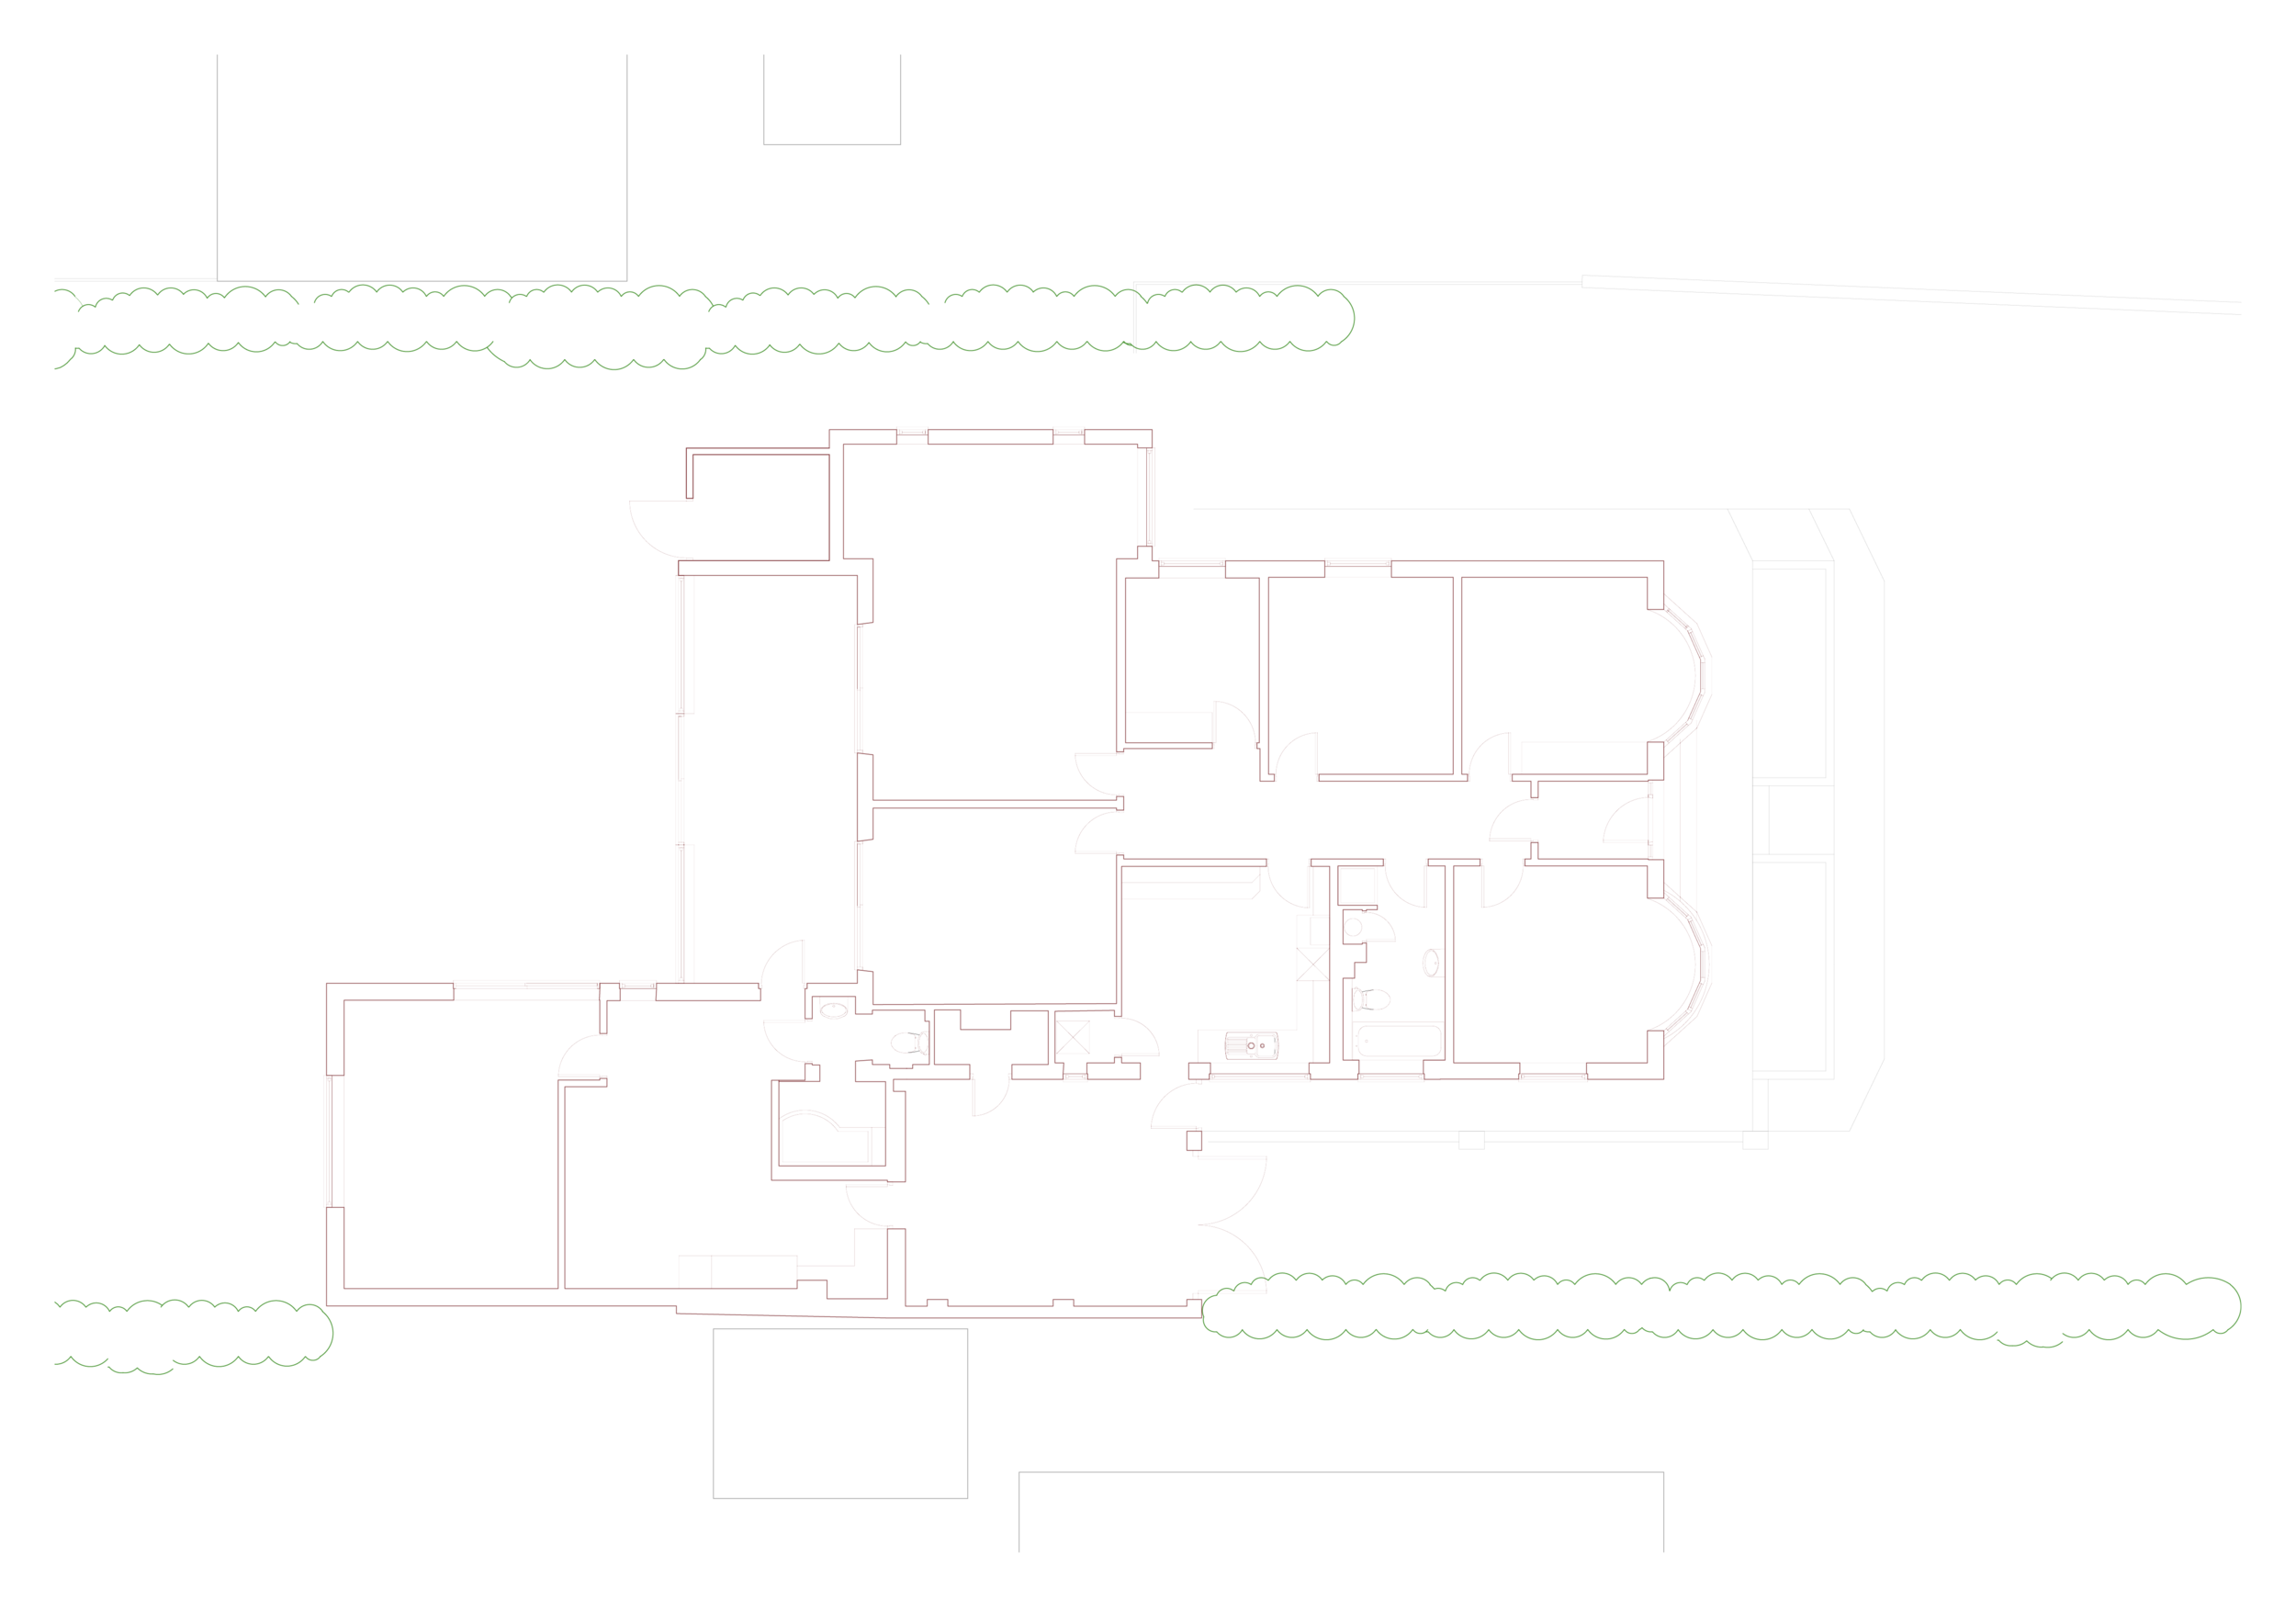 GROUND FLOOR PLAN EXISTING - DRIFFIELD ARCHITECTS - SAMUEL KENDALL ASSOCIATES.png